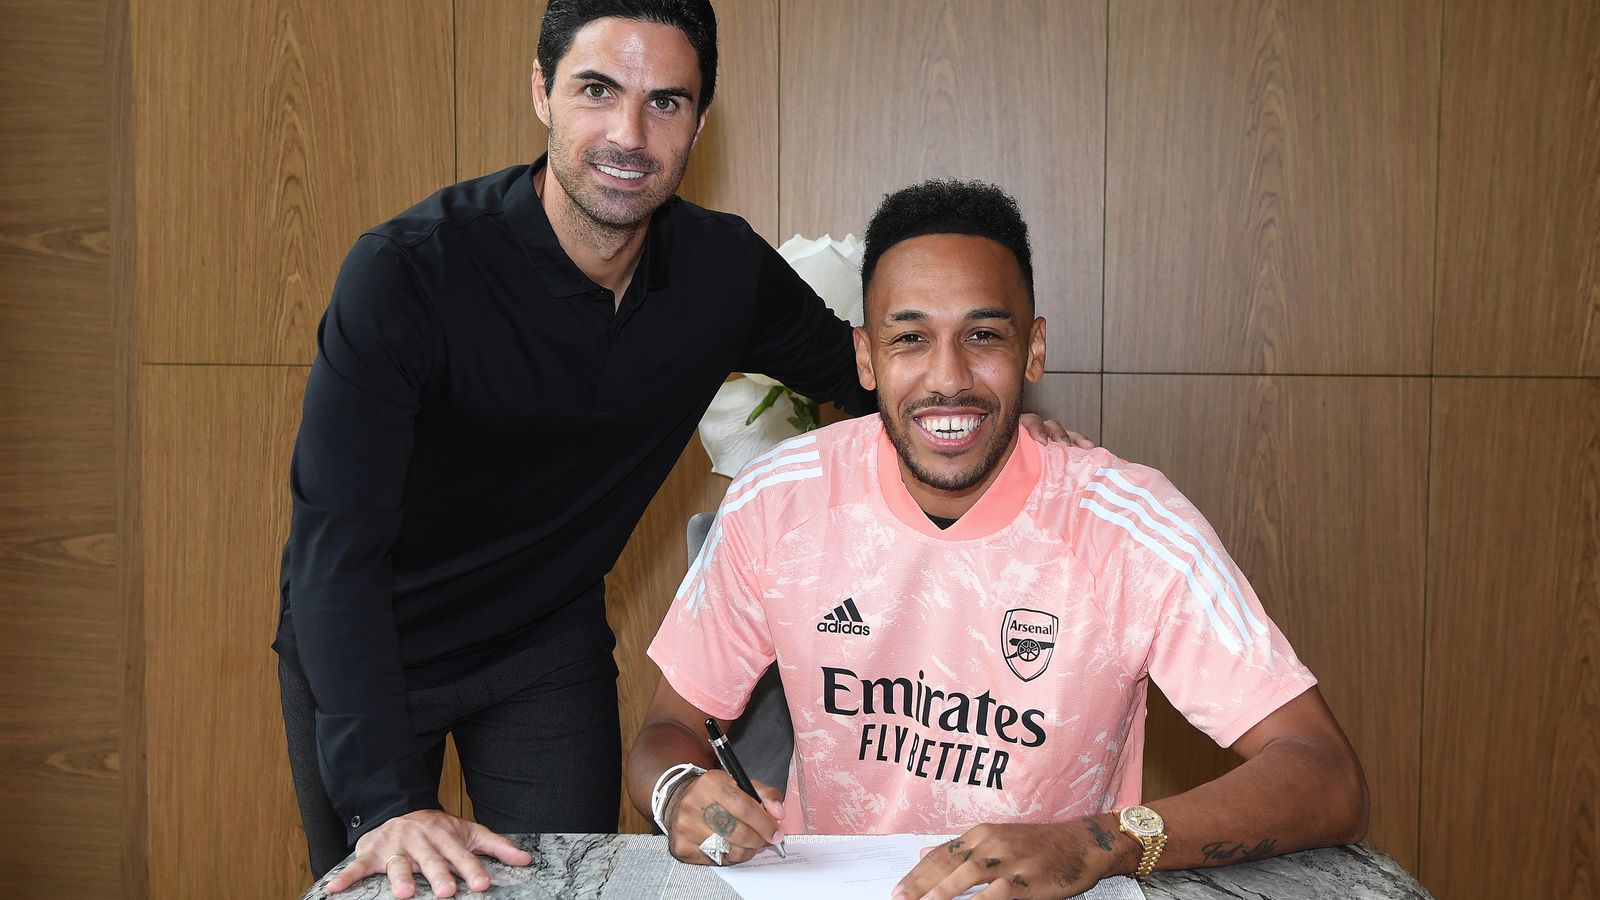 Pierre-Emerick-Aubameyang-Arsenal-captain-signs-a-new-three-year-contract